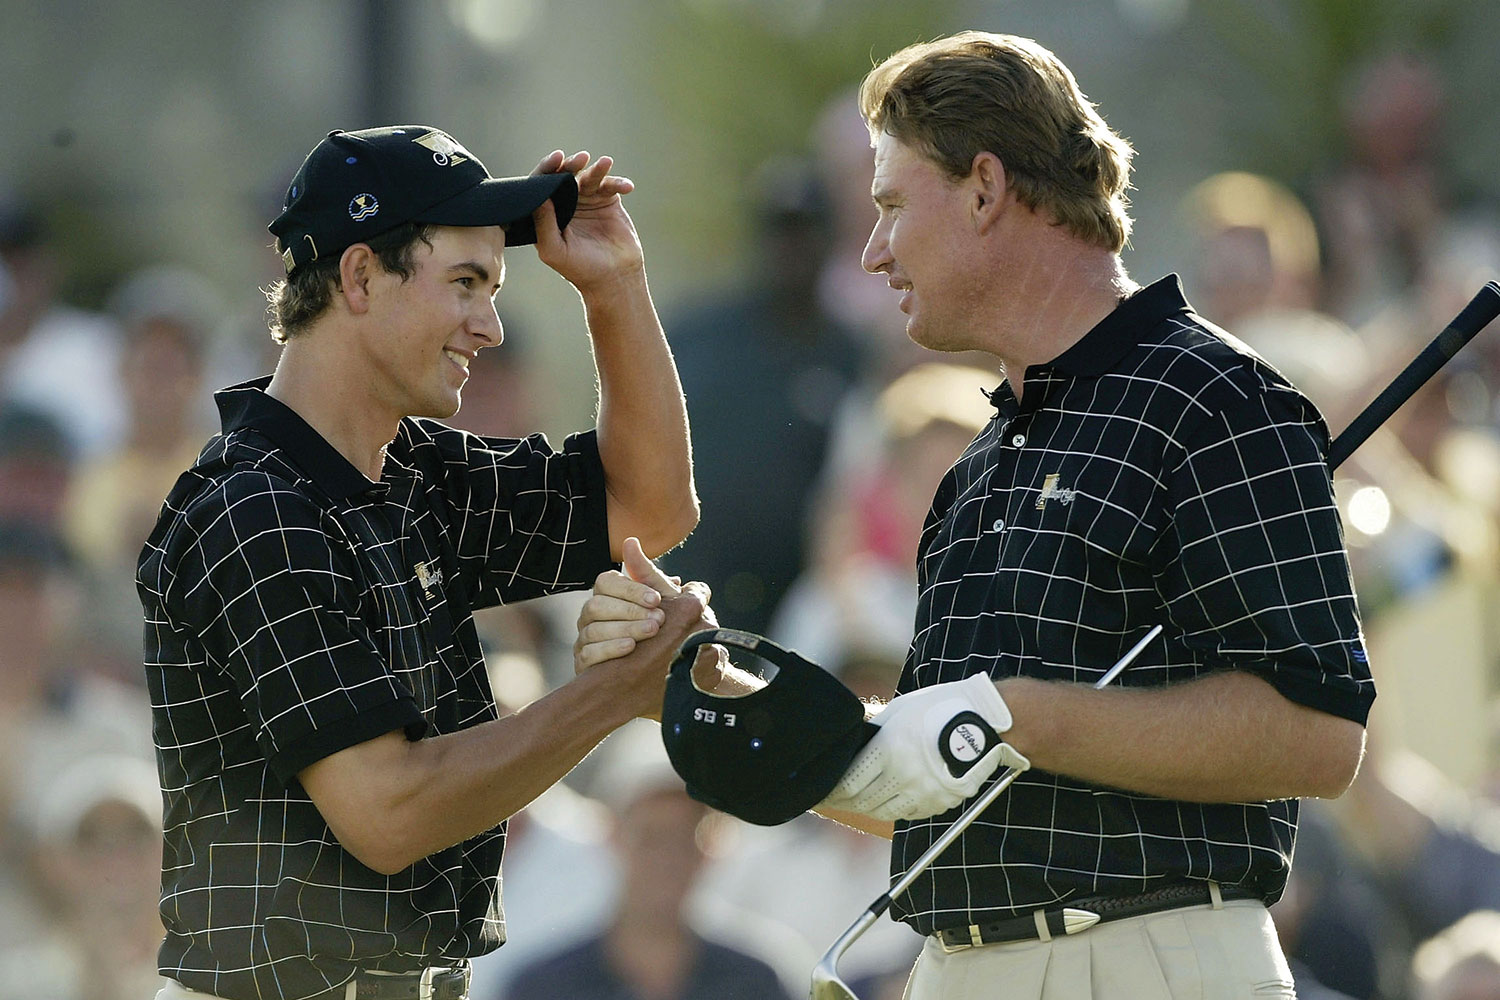 A 23-year-old Scott partnered South African icon Ernie Els in his homeland 14 years ago.